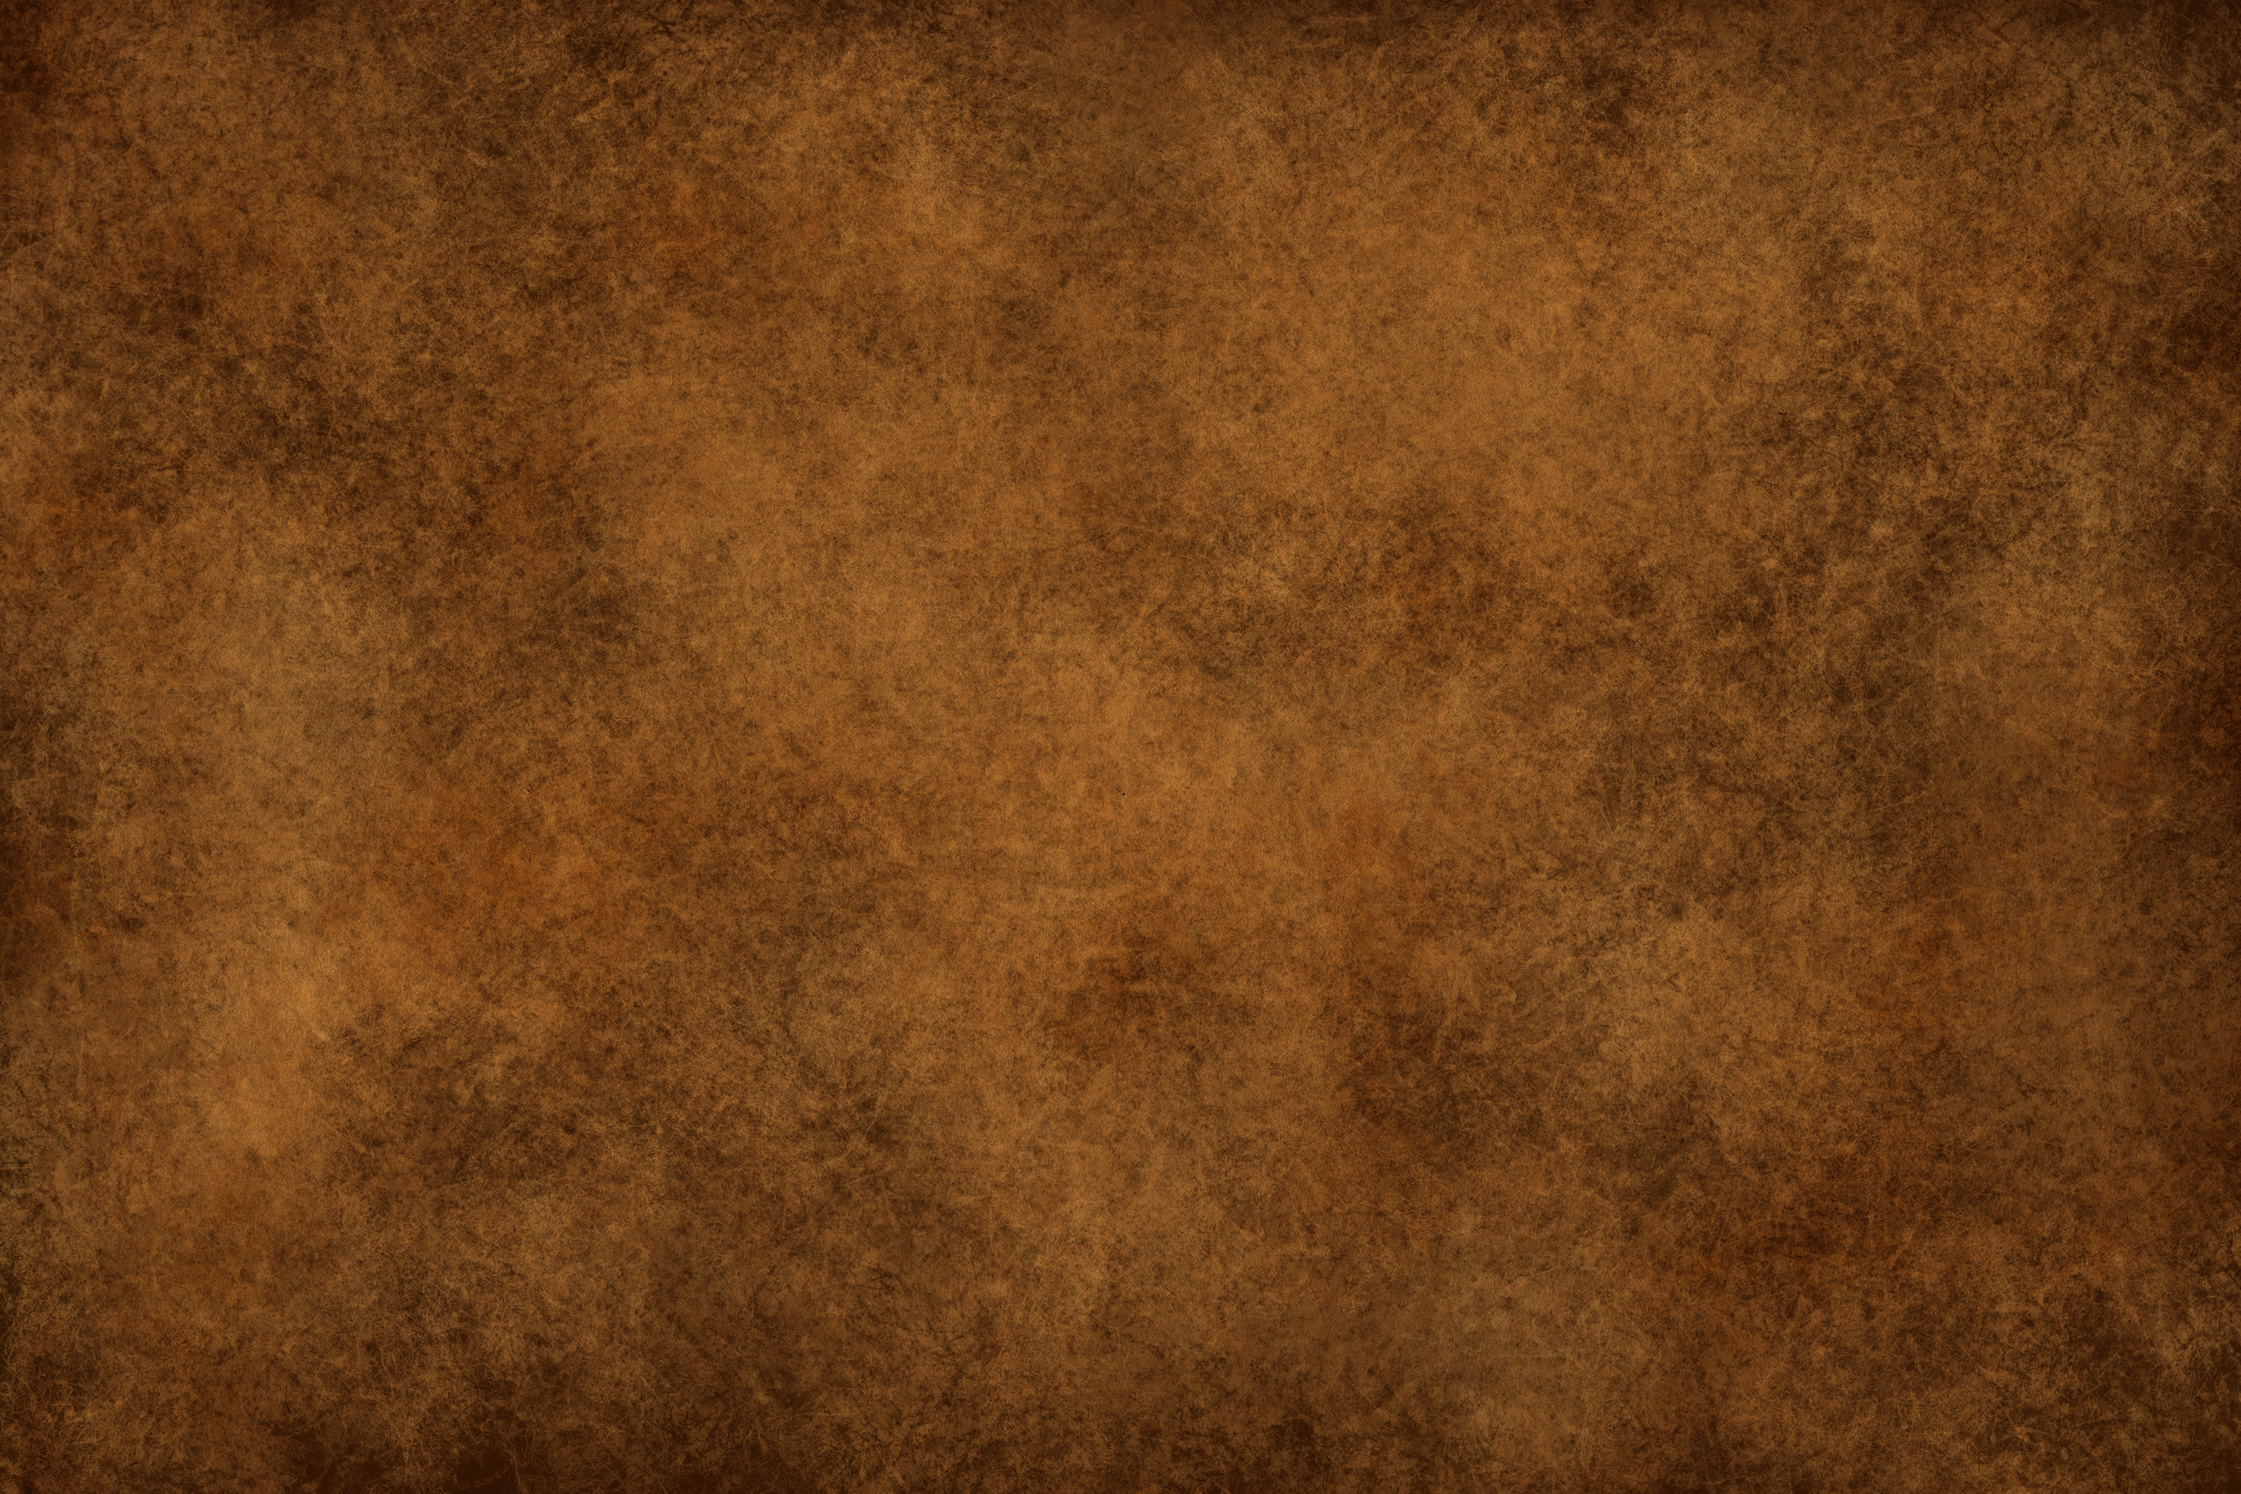 Texture Brown Ragged Old Paper Background